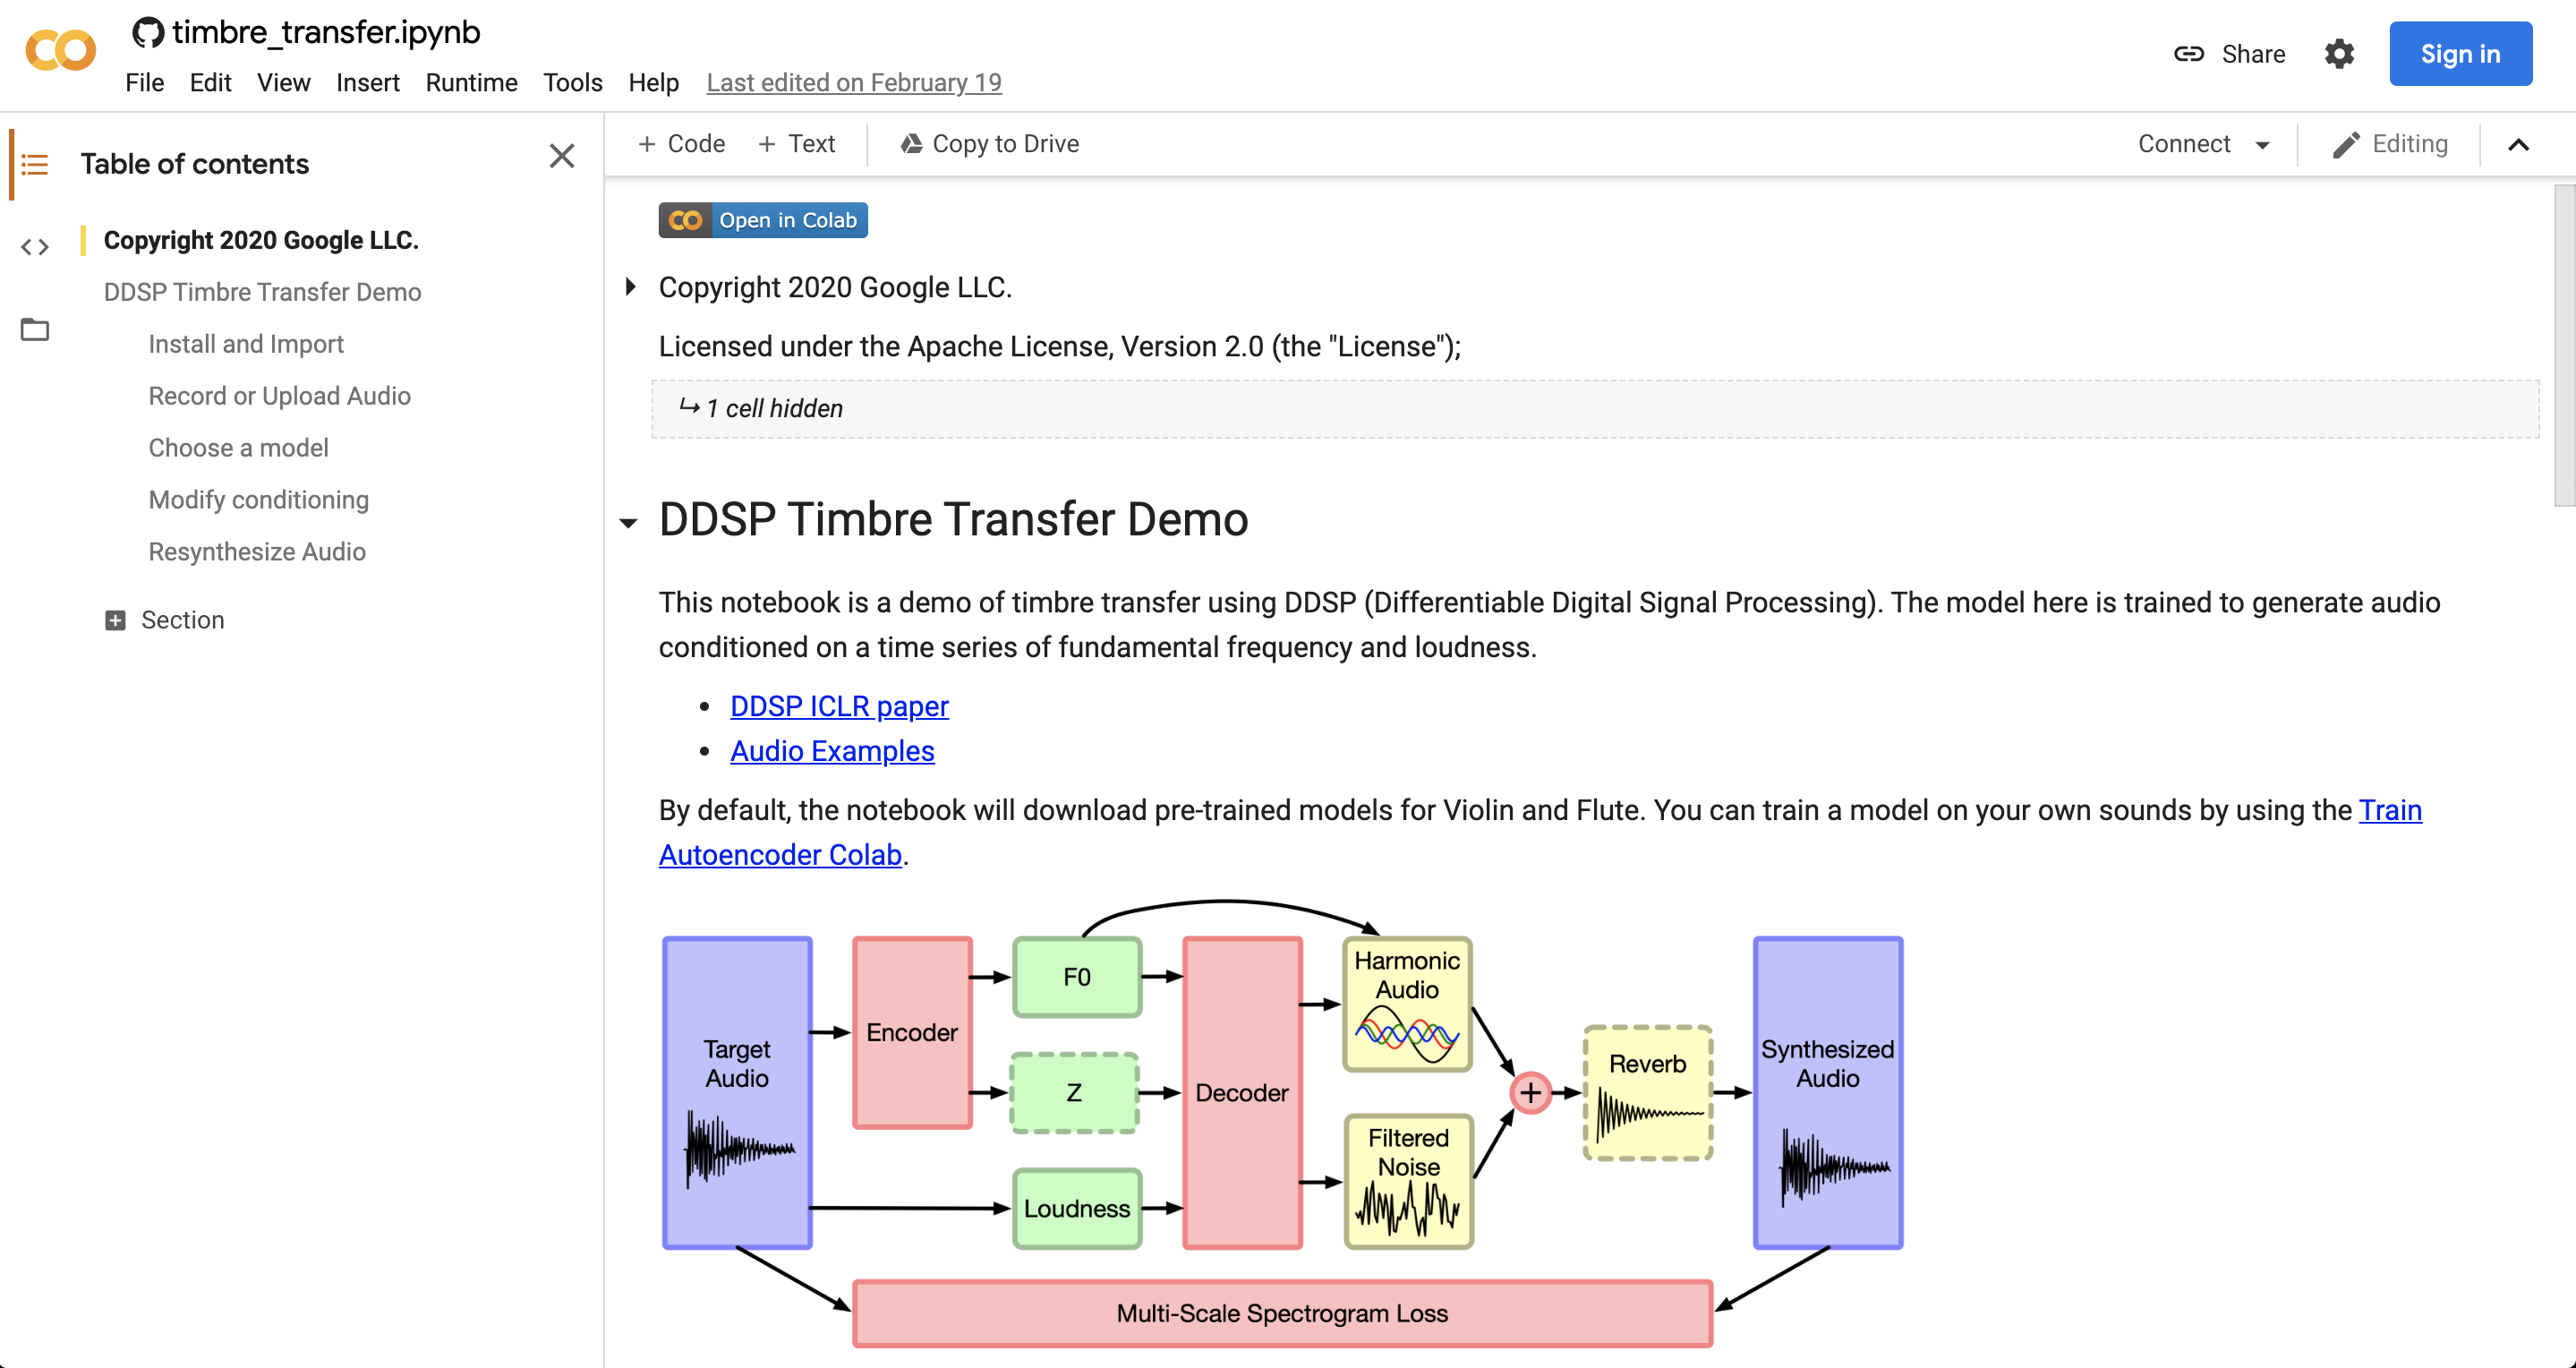 overview of DDSP Timbre Transfer